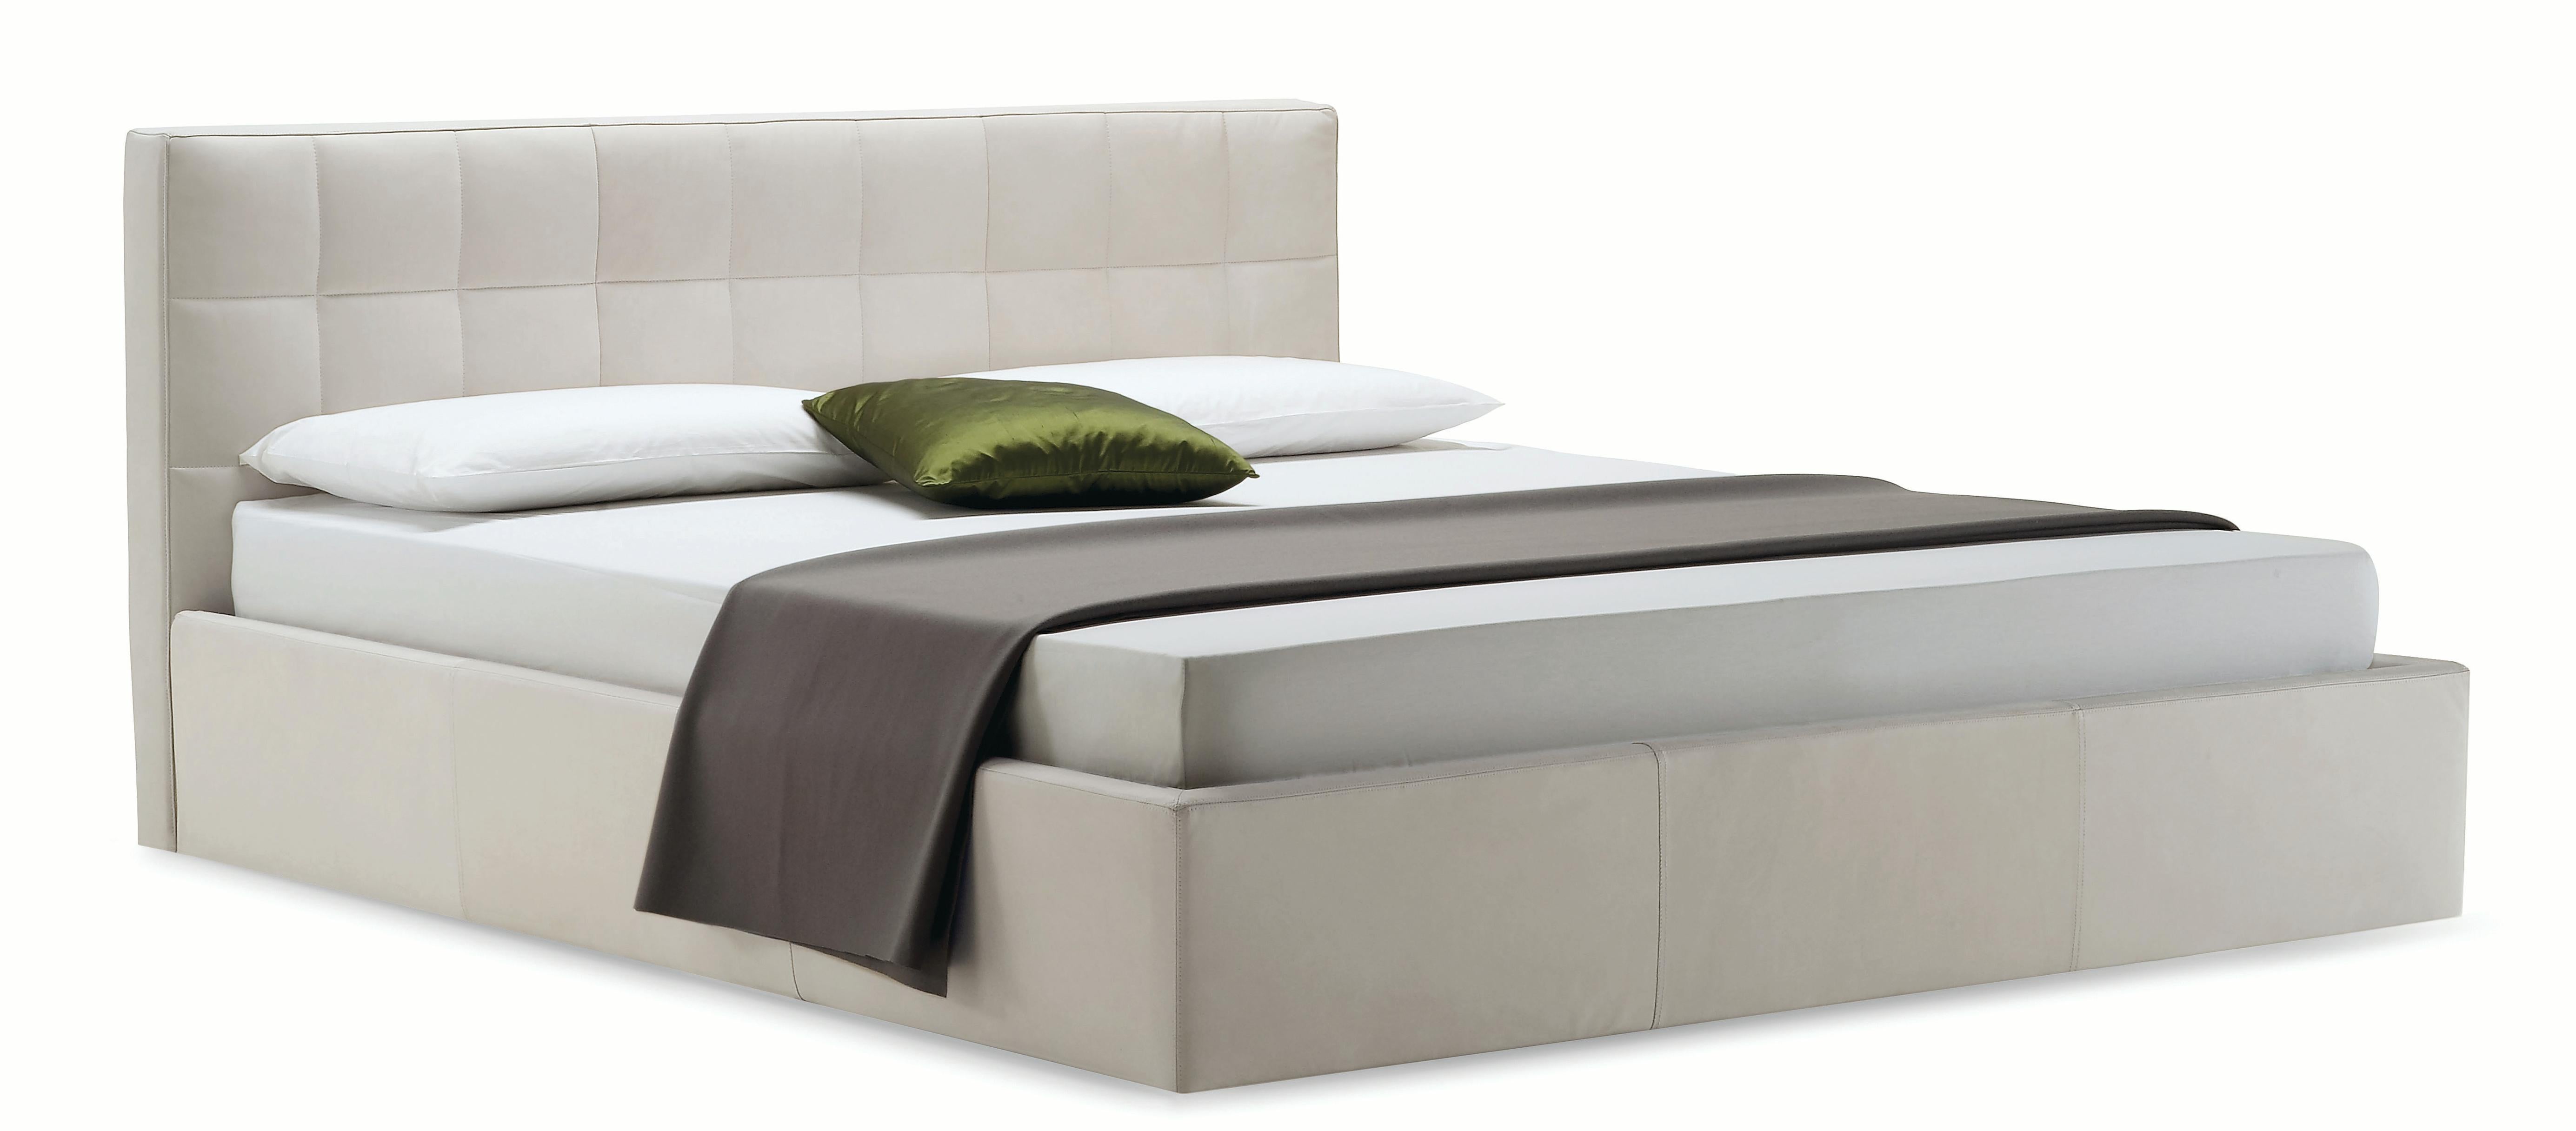 Zanotta Queen Size Box Bed with Container Unit in White Upholstery & Steel Frame by Emaf Progetti

Bed with container unit. Steel frame, varnished aluminium. Suspension in natural bent beech strips, with stiffness adjusters, inserted in nylon